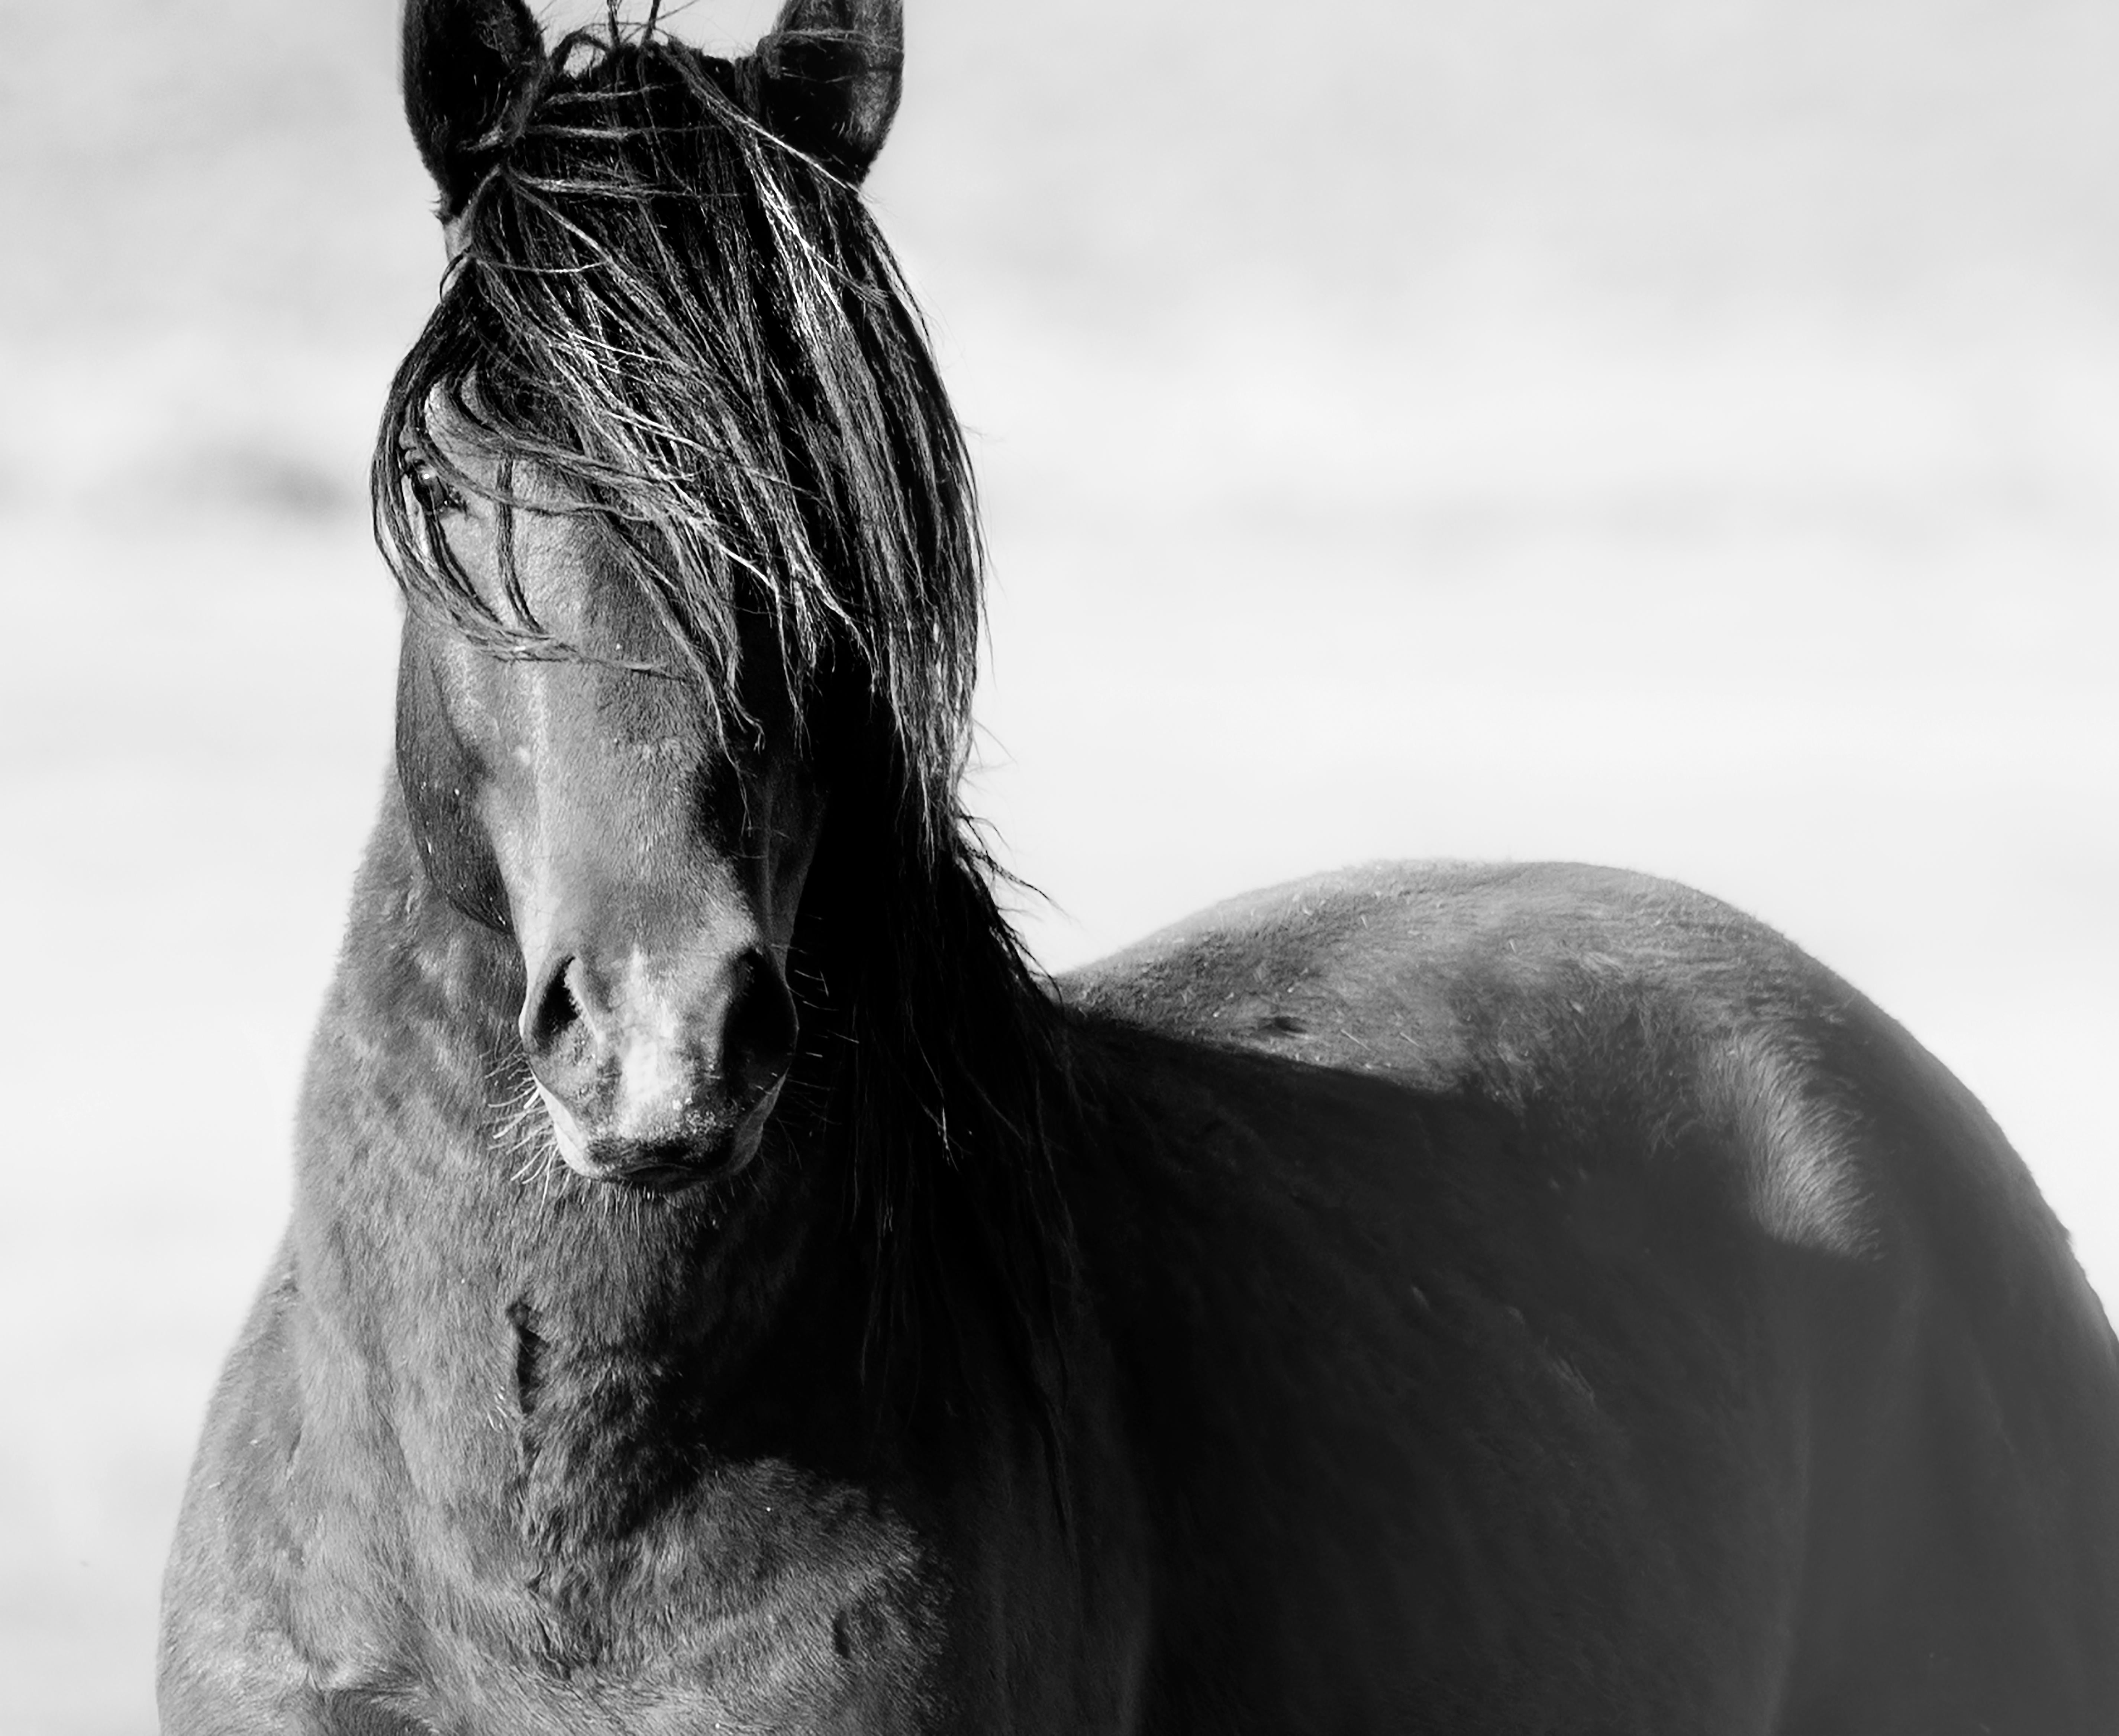 Shane Russeck Animal Print - Black and White Photography of Wild Horse Mustang "Wild" 40x60 Fine Art Singed